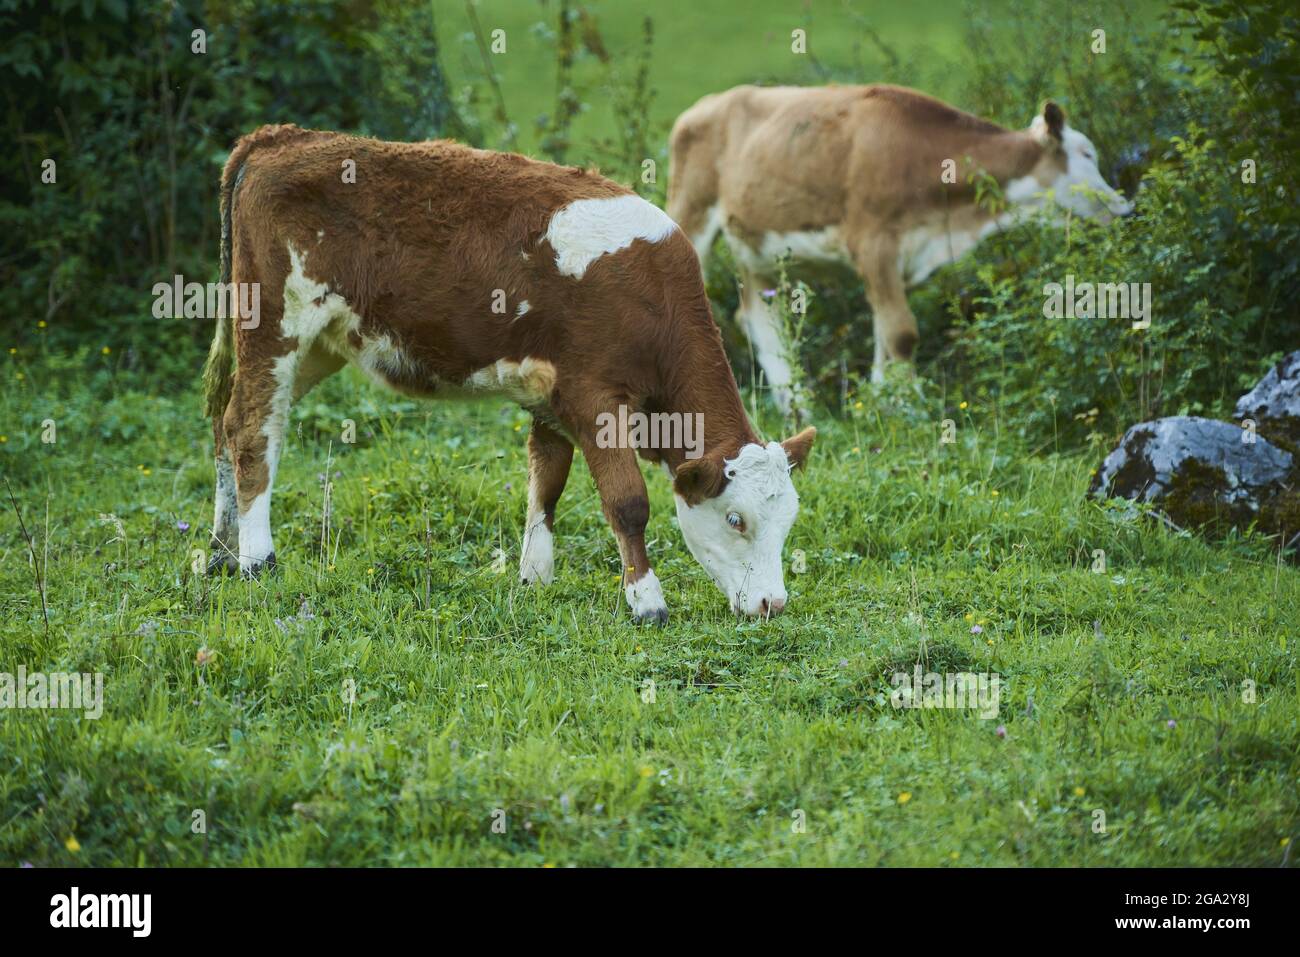 Cattle (Bos taurus) grazing on grass and bushes on a meadow; Bavaria, Germany Stock Photo